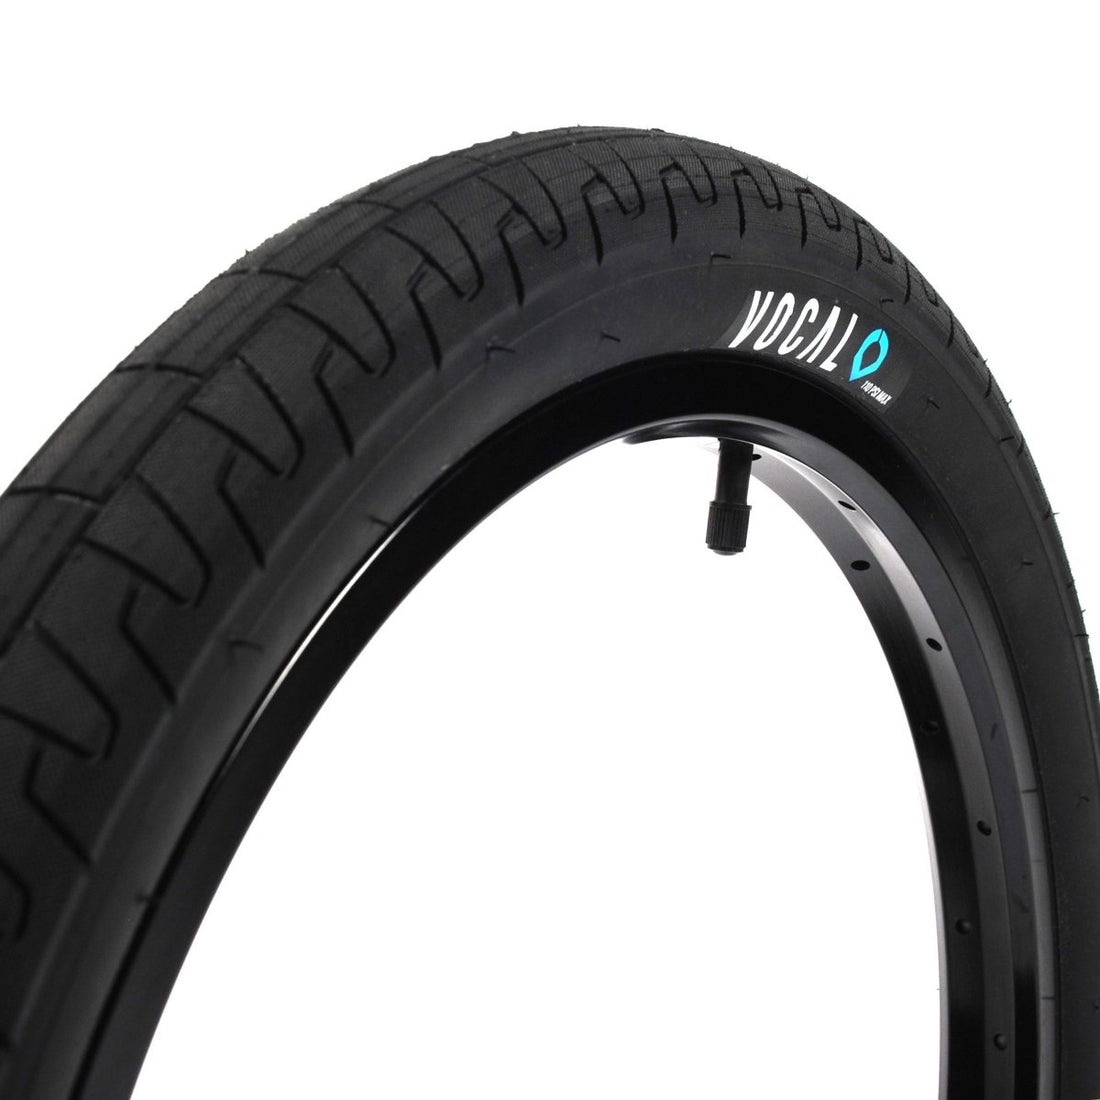 Vocal Mig Tyre at 22.49. Quality Tyres from Waller BMX.